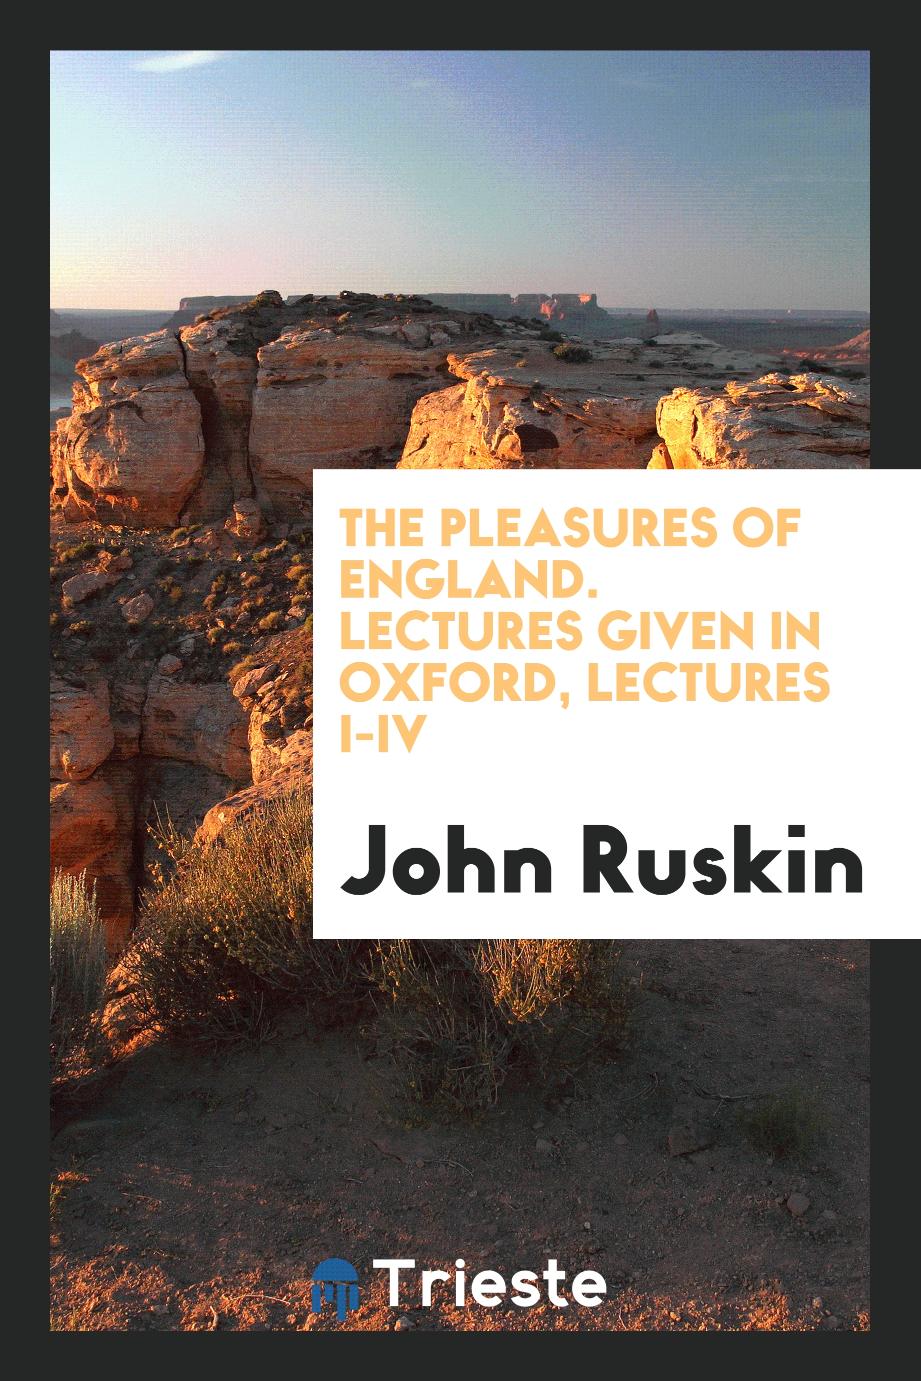 The pleasures of England. Lectures Given in Oxford, Lectures I-IV